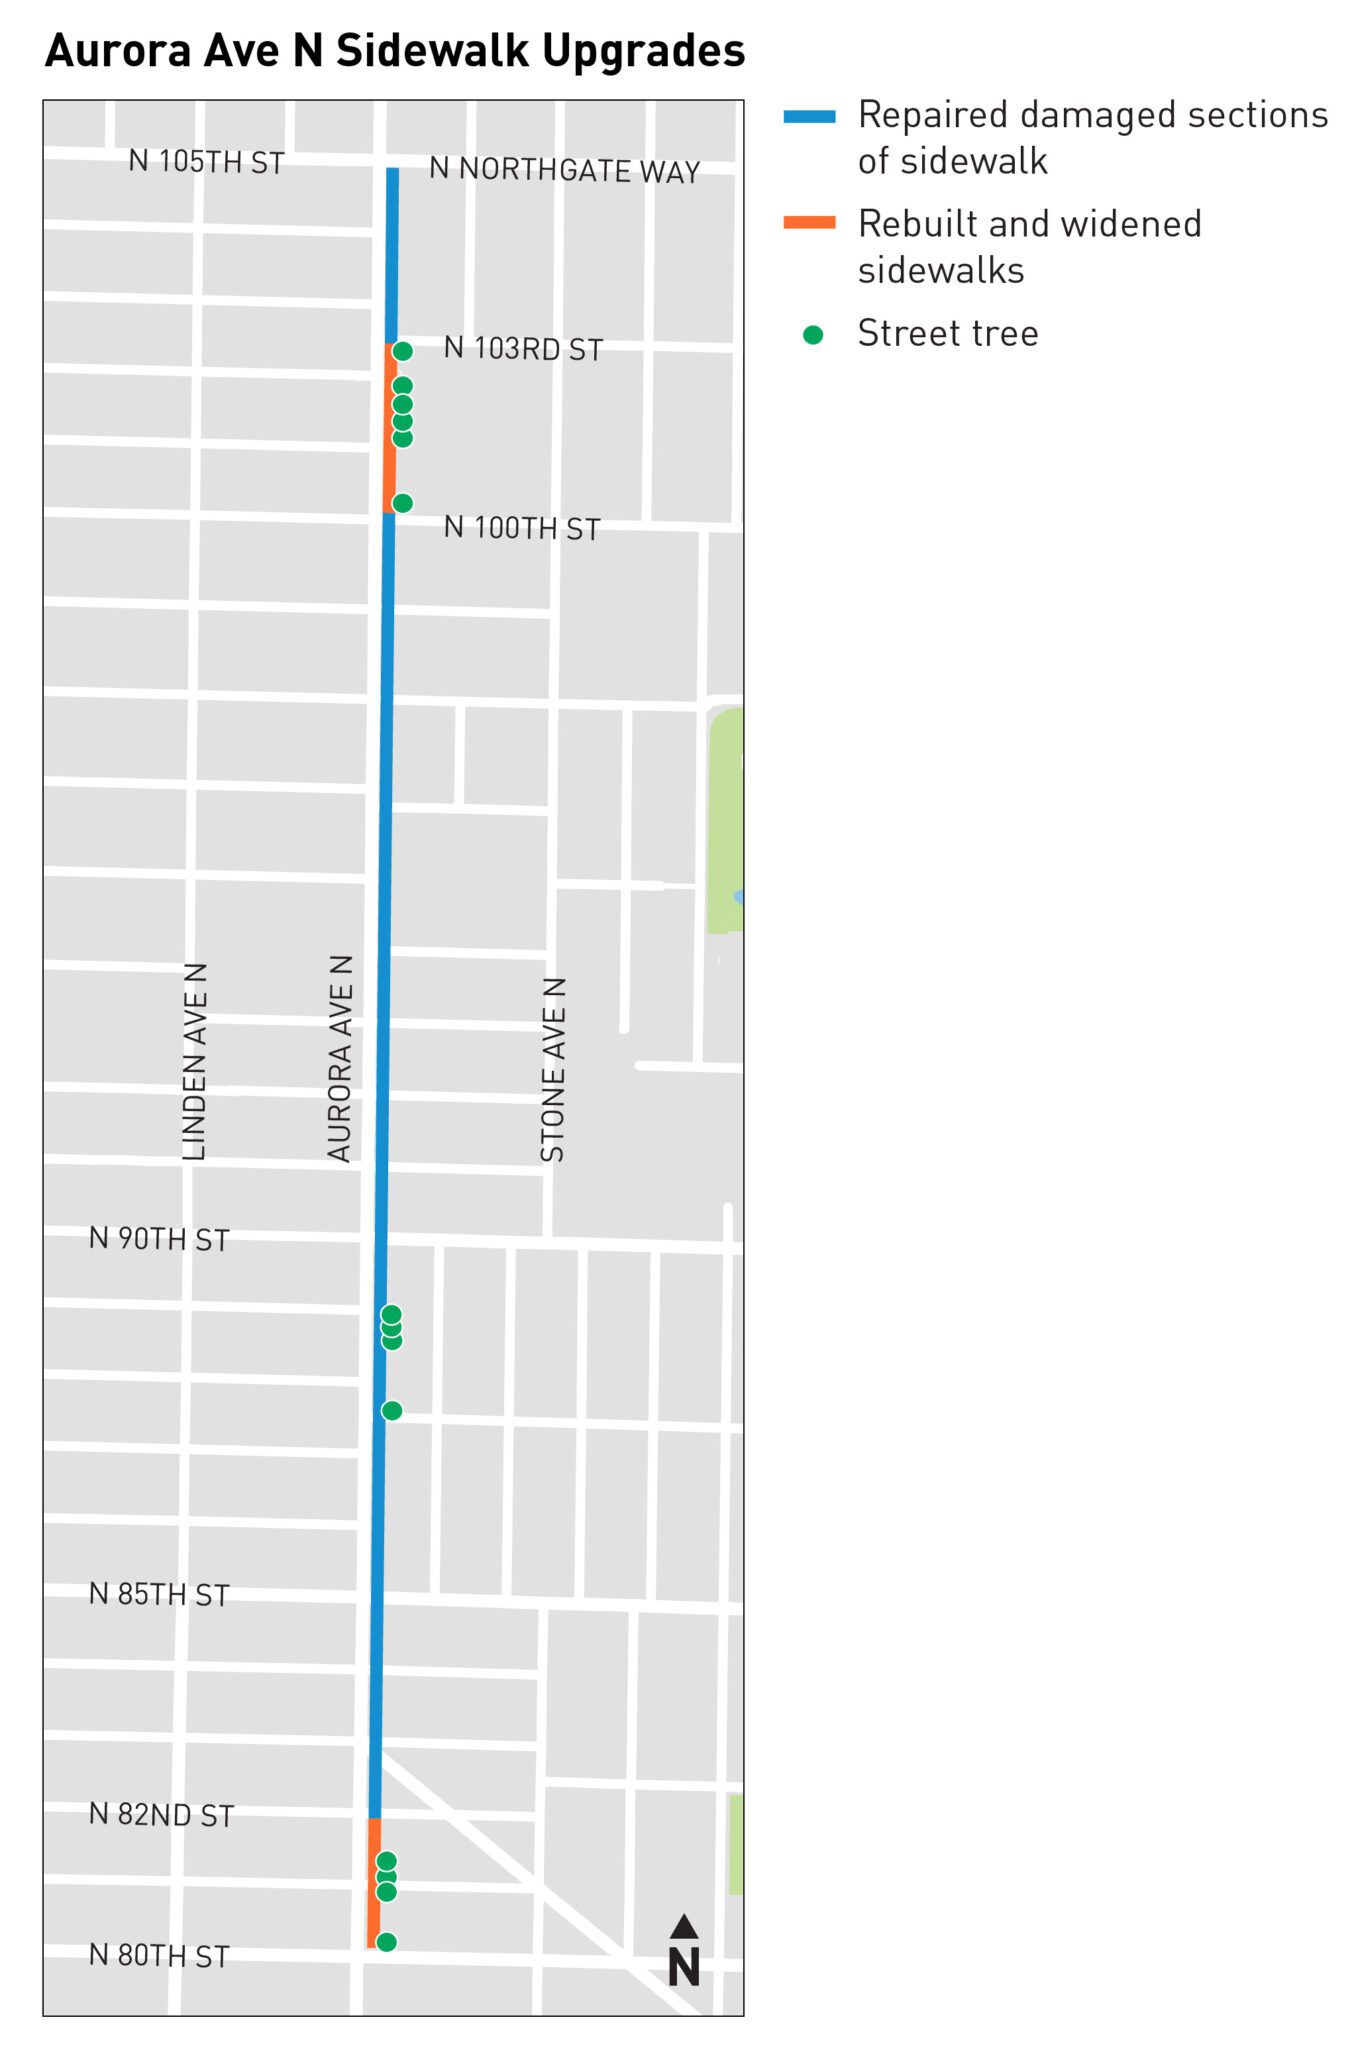 A map of the project area. The area extends along Aurora Ave N from N 105th St to the north, to N 80th St on the south. Repaired damaged sections of sidewalk are shown in blue line, and rebuilt and widened sidewalks are shown with orange line. Street tree locations are shown with green dots.